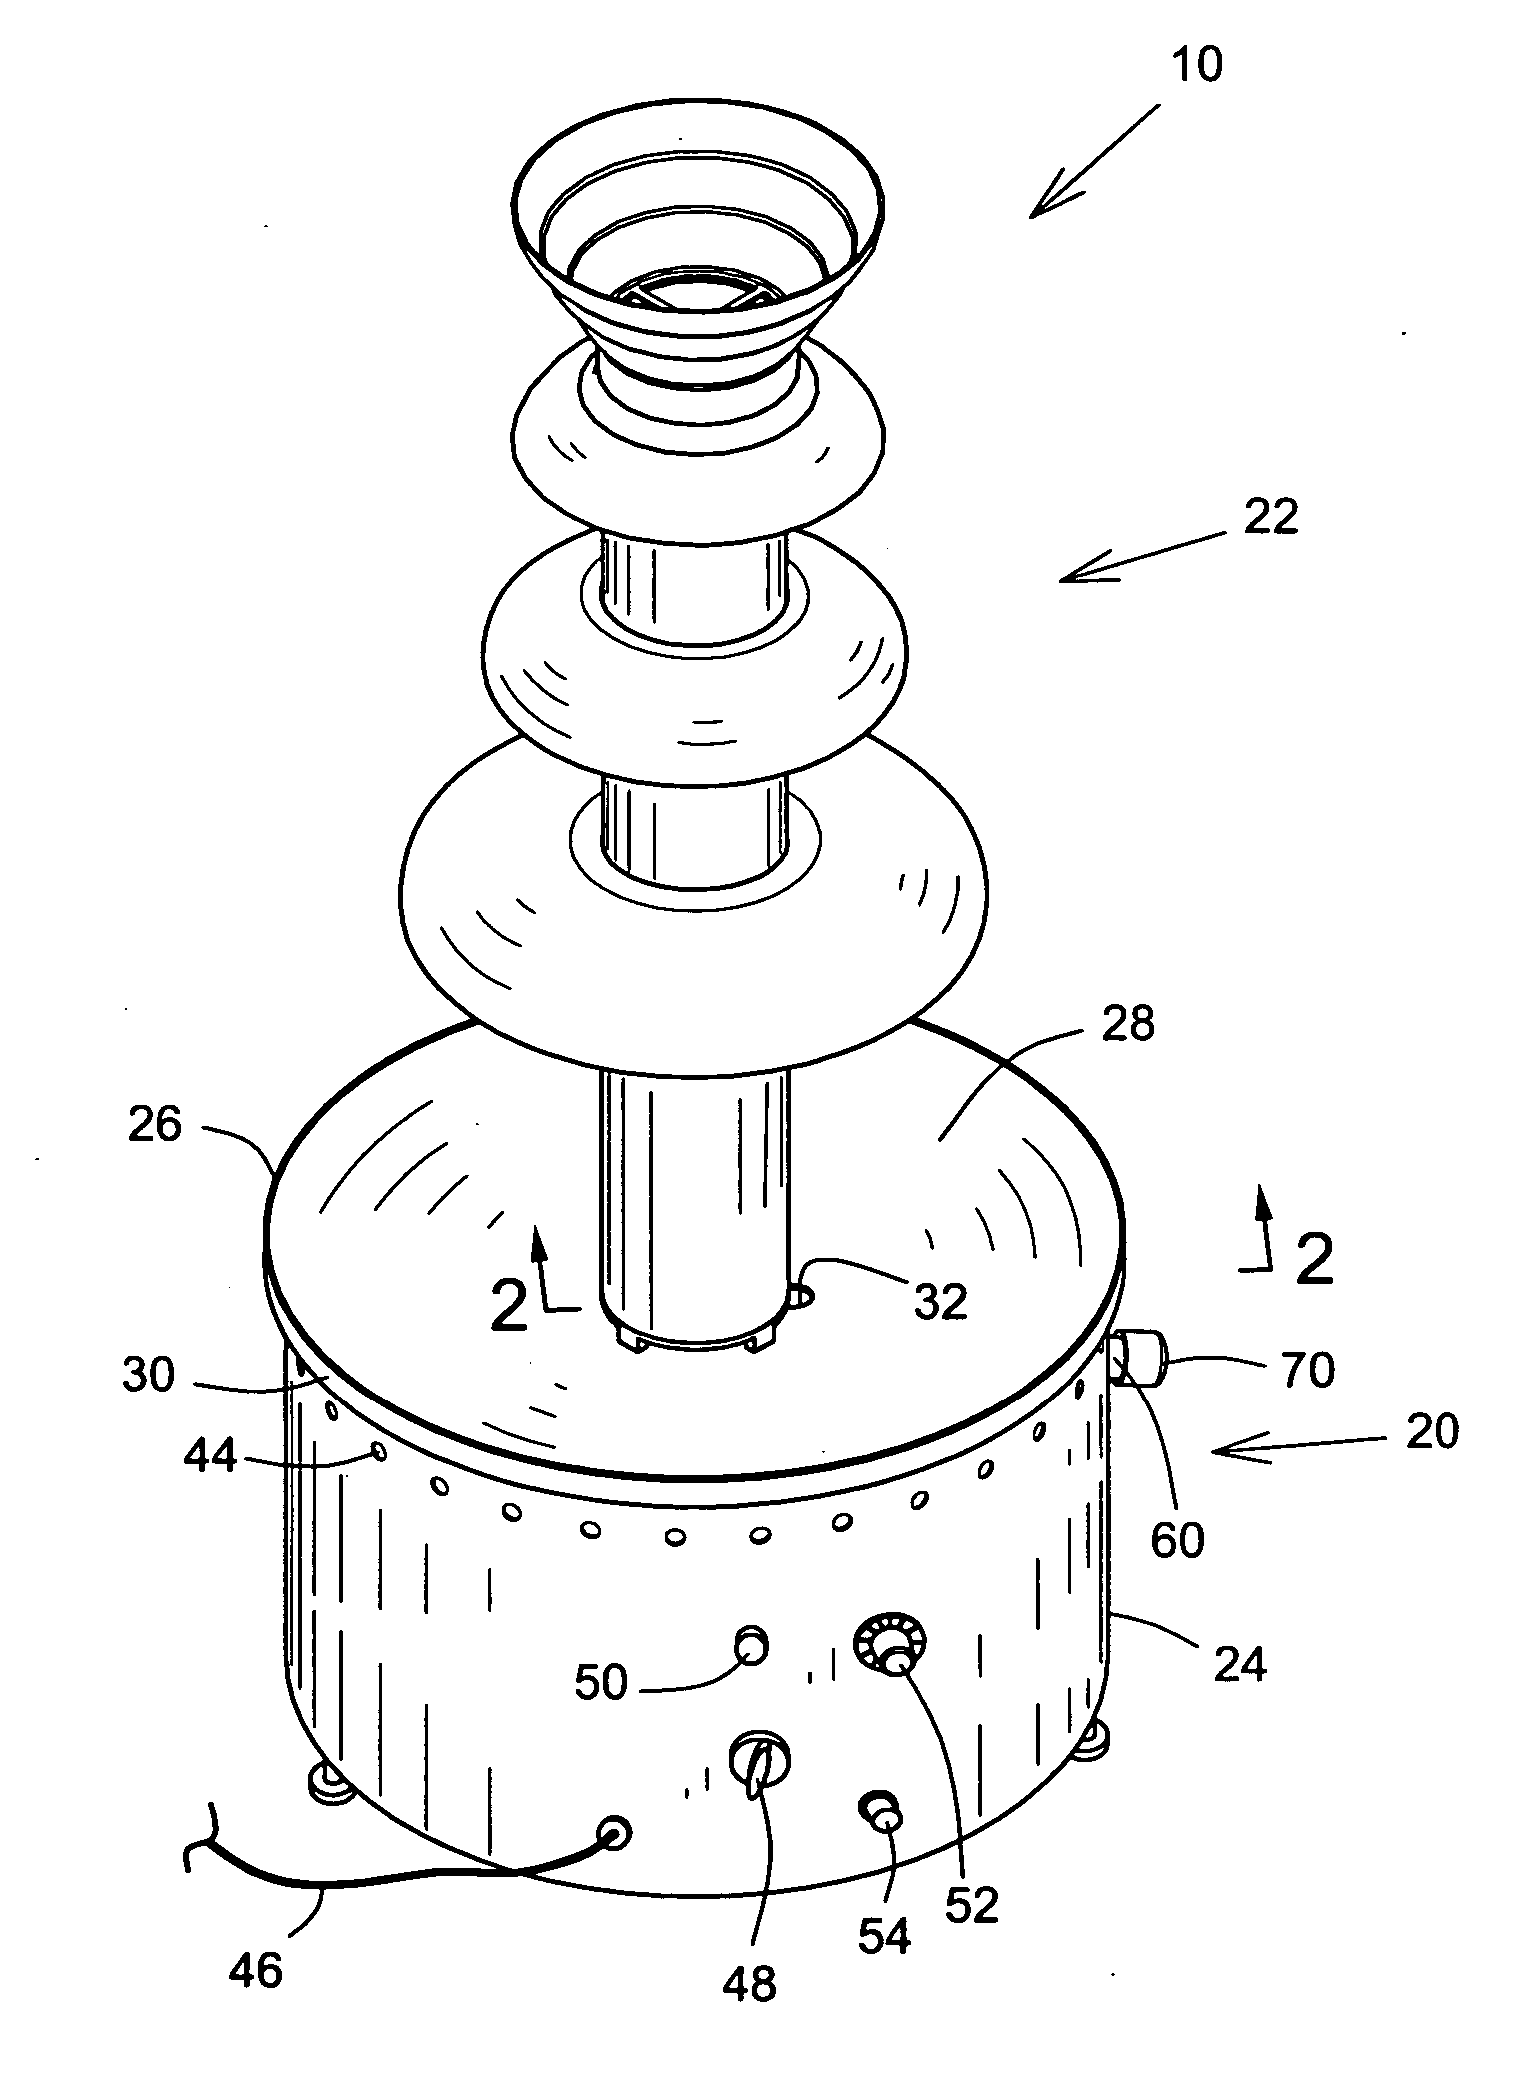 Chocolate fountain apparatus with output port